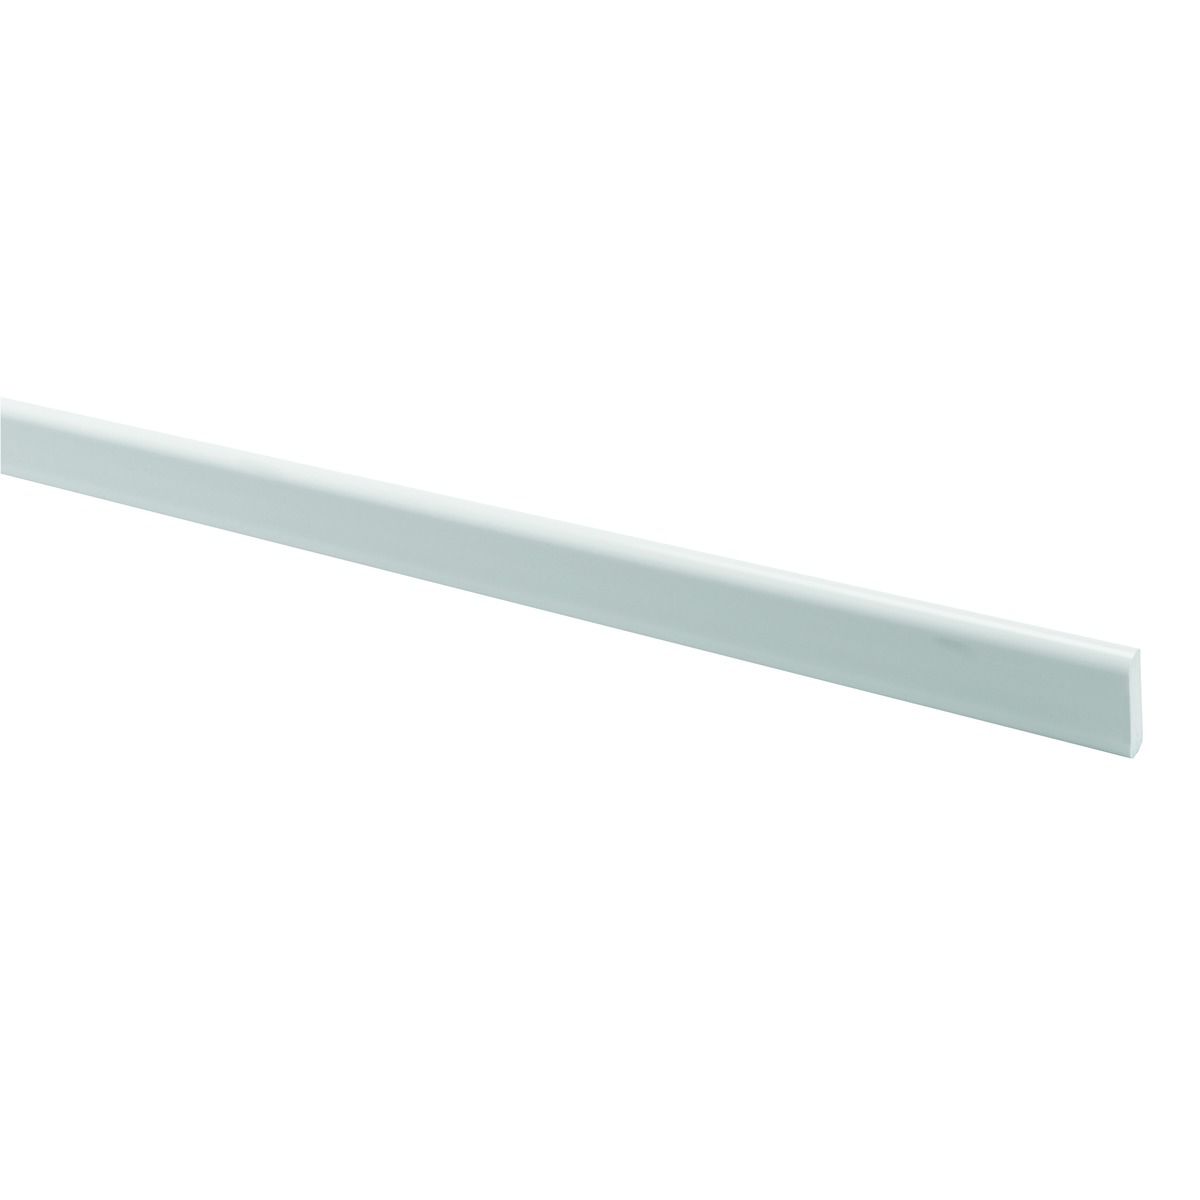 Image of Wickes PVCu White Cloaking Profile 95 x 2500mm